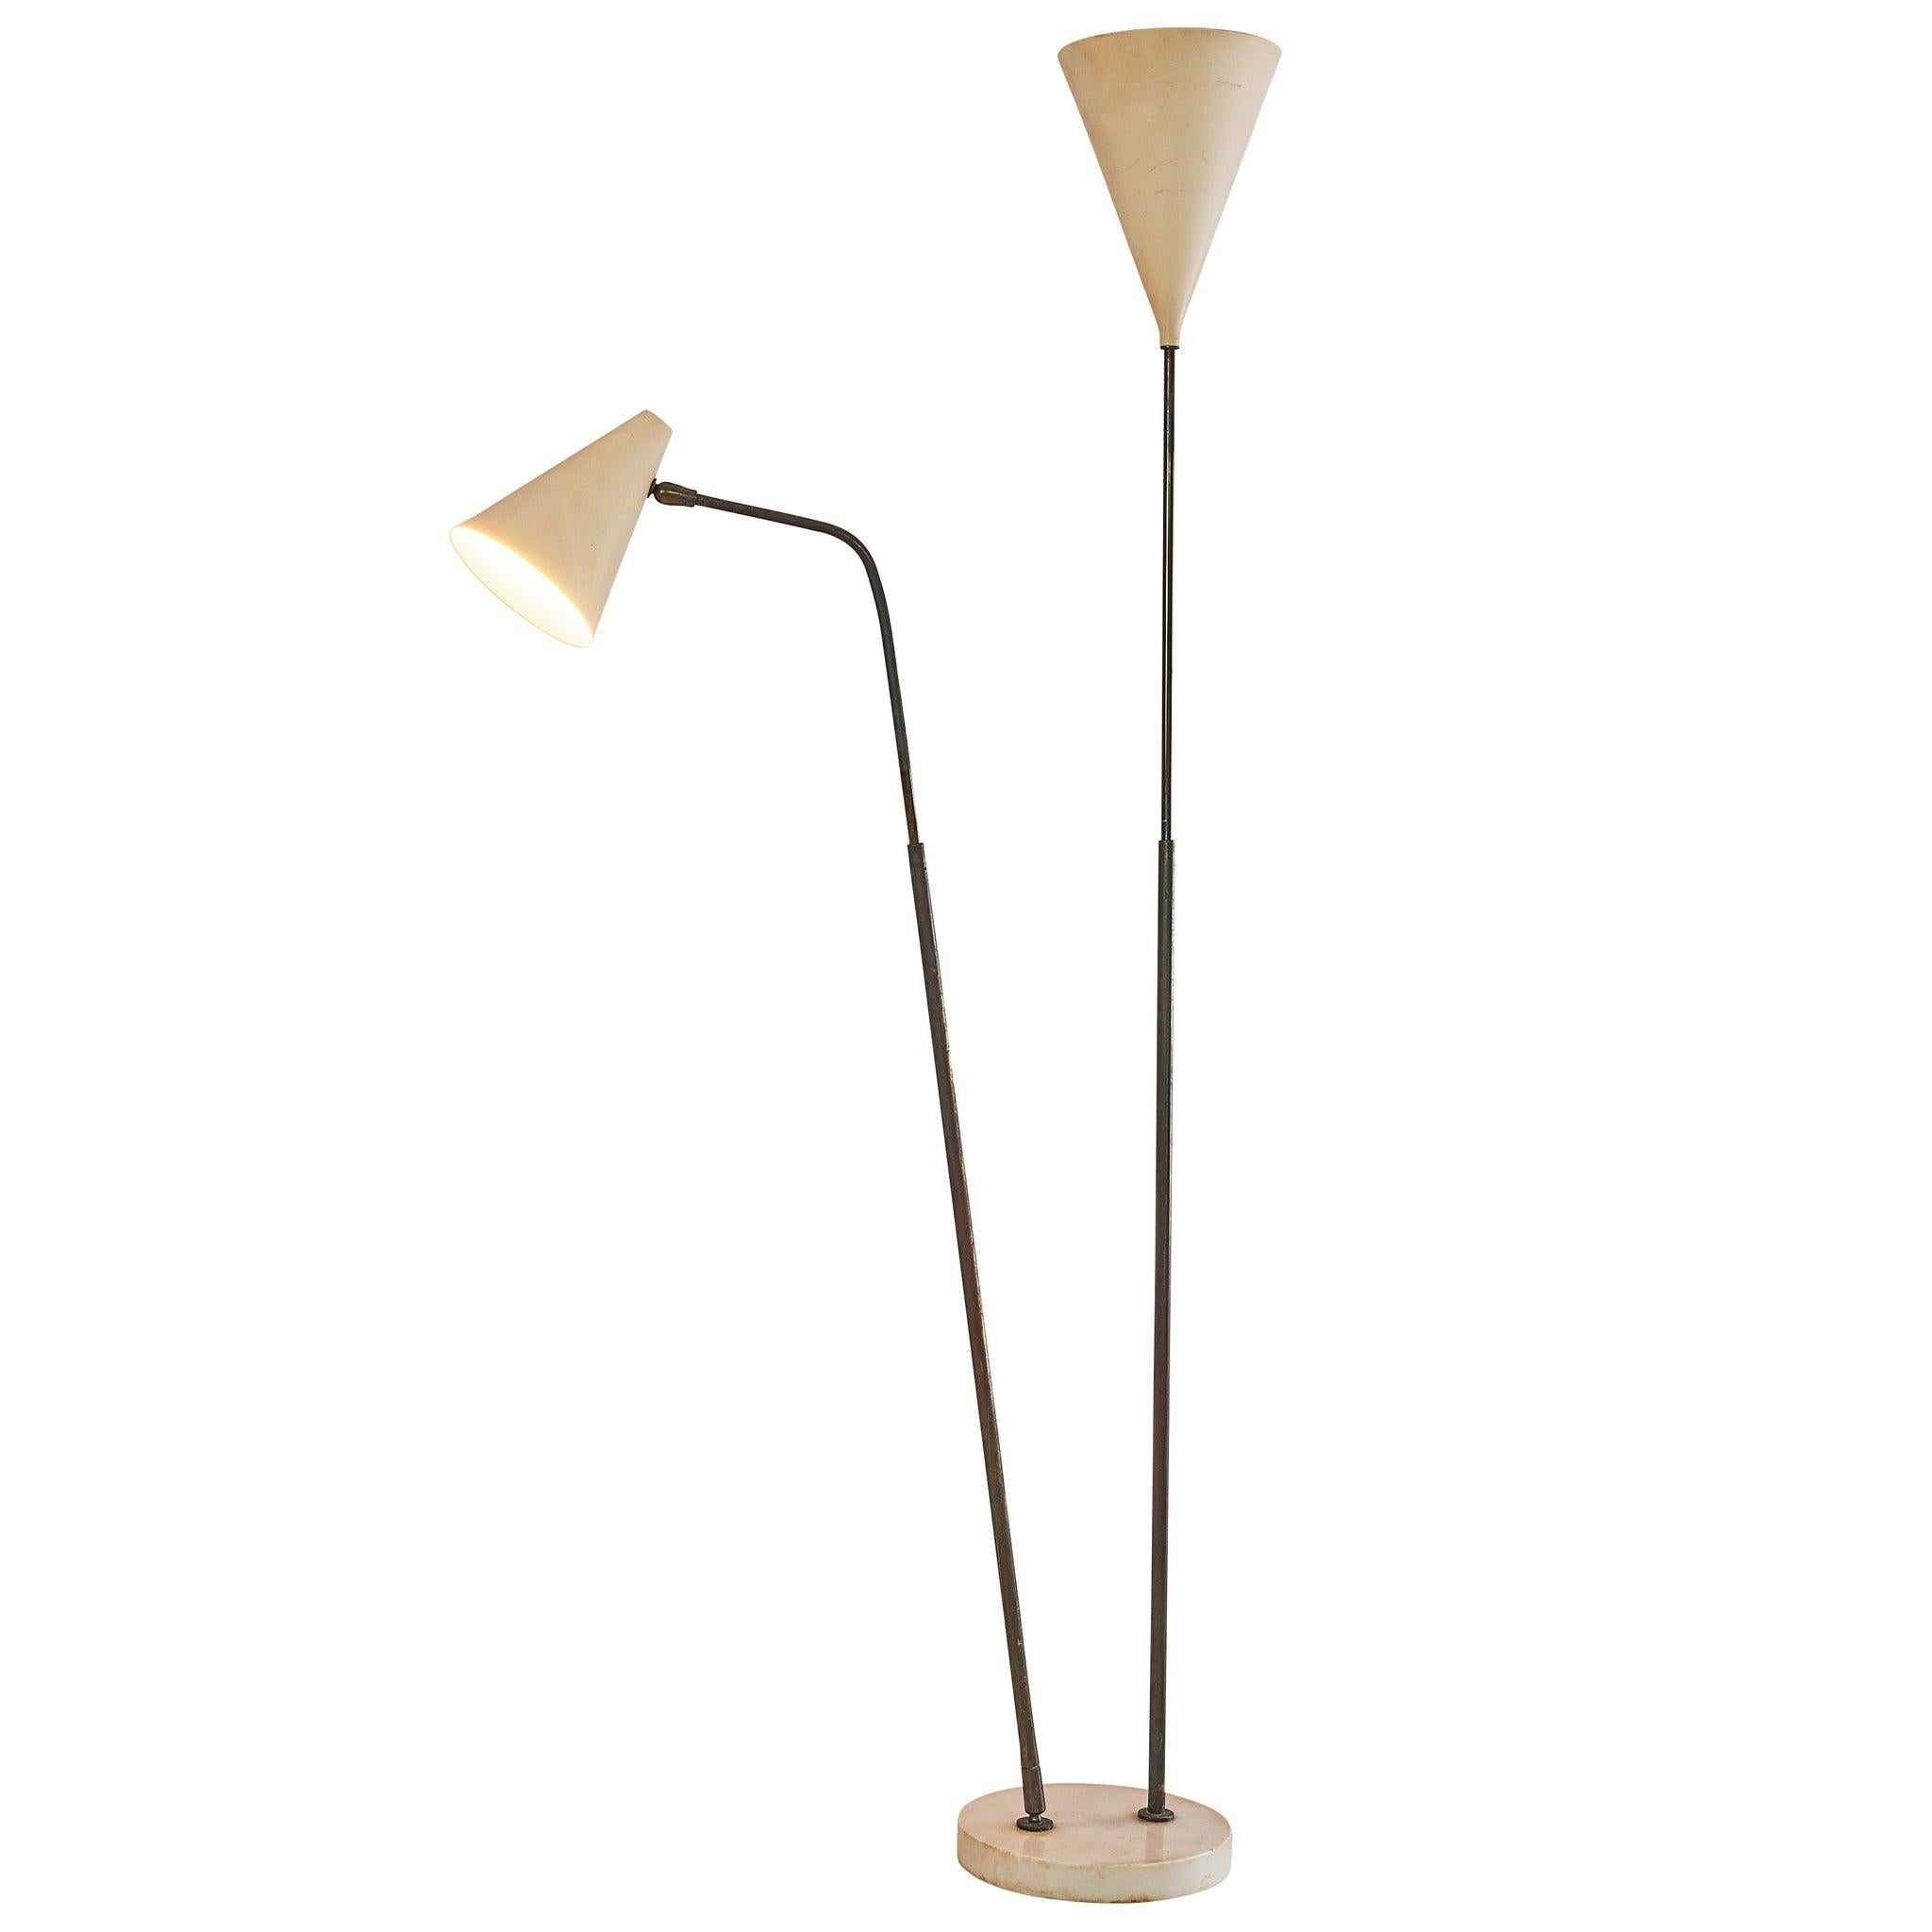 Giuseppe Ostuni Floor Lamp with Two White Shades